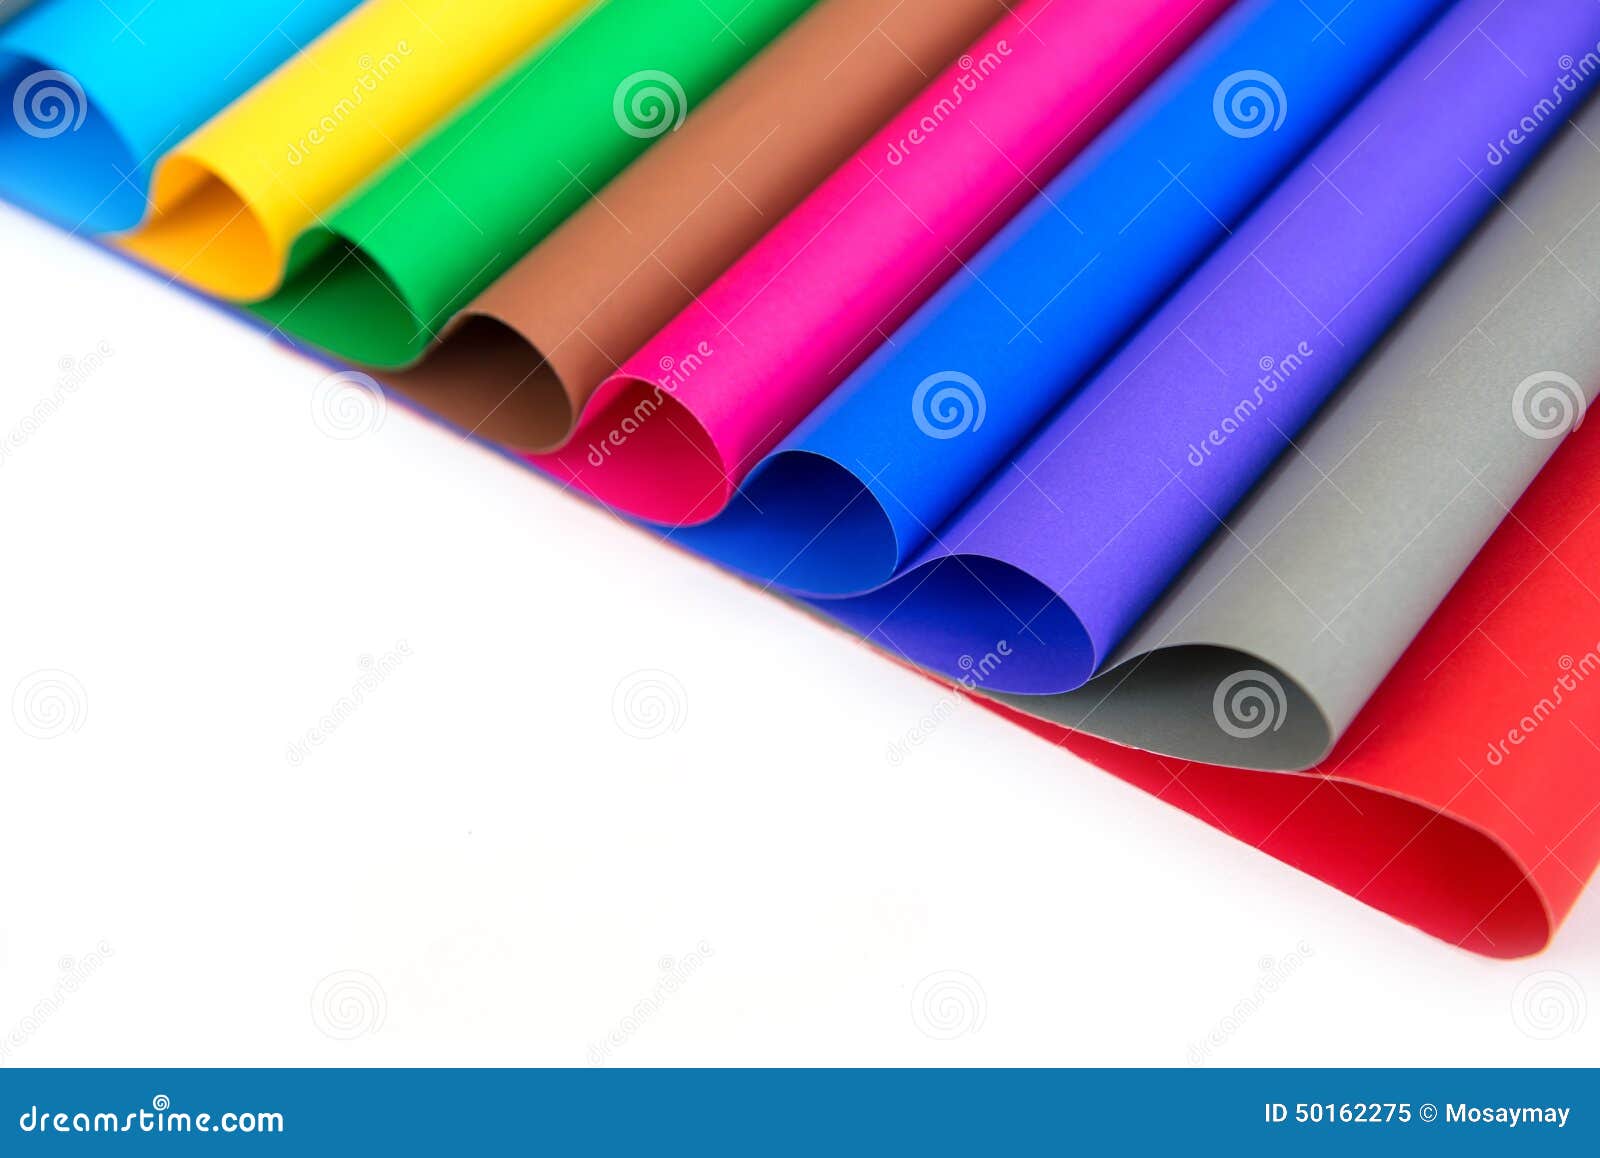 Lot of Color Paper for Crafts Idea Stock Image - Image of paper